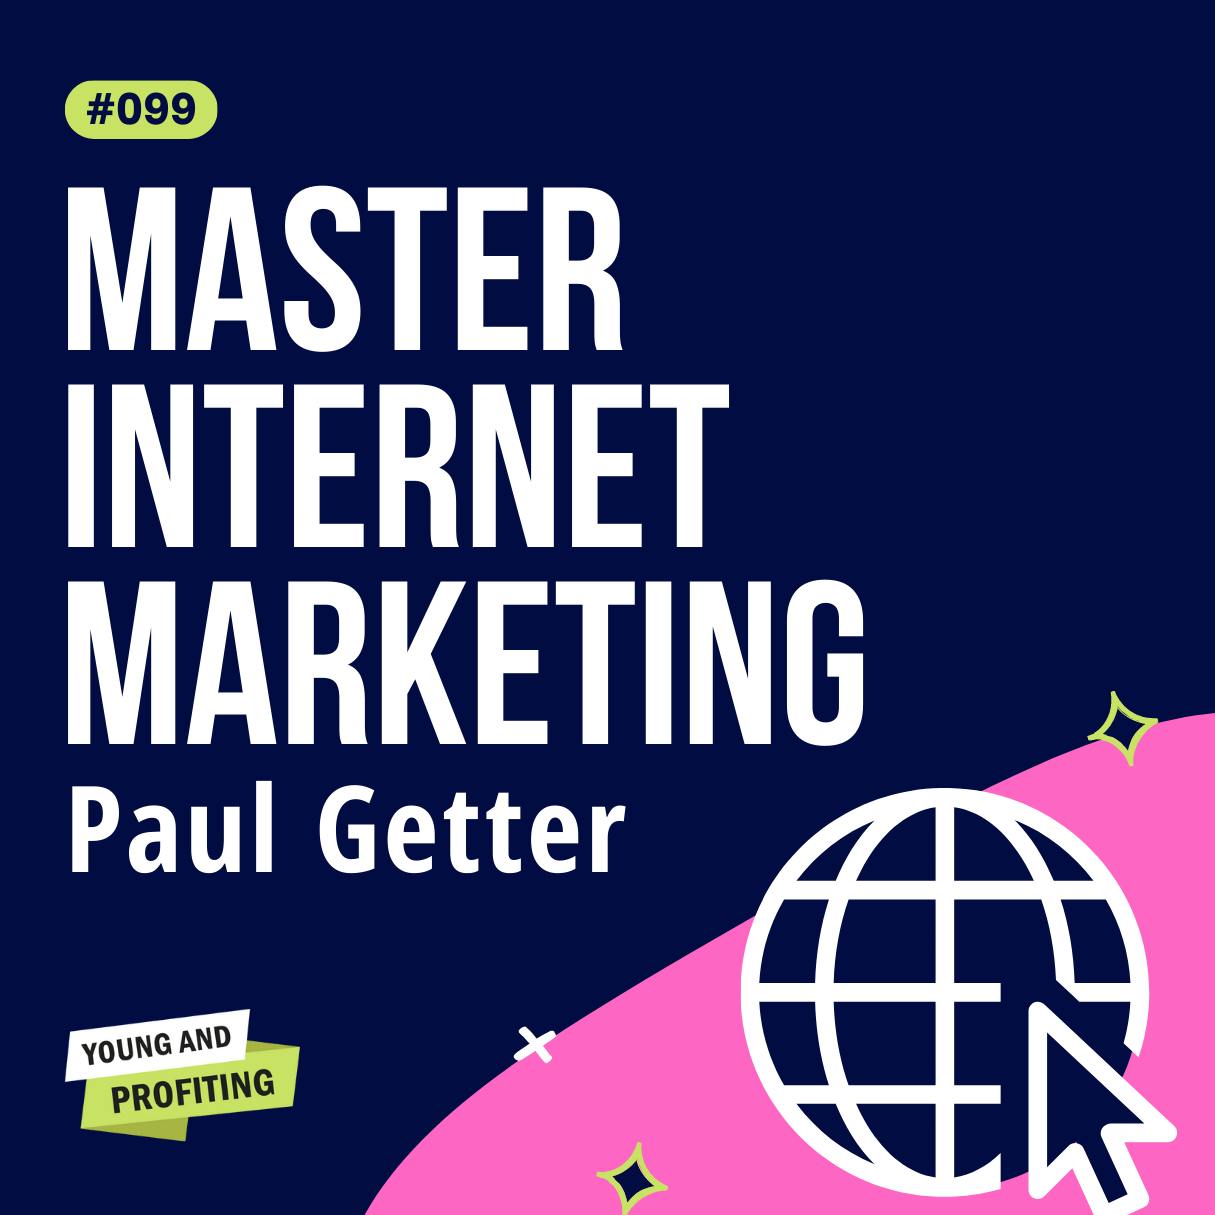 YAPClassic: Paul Getter, Marketing Secrets to Grow Your Brand and Business